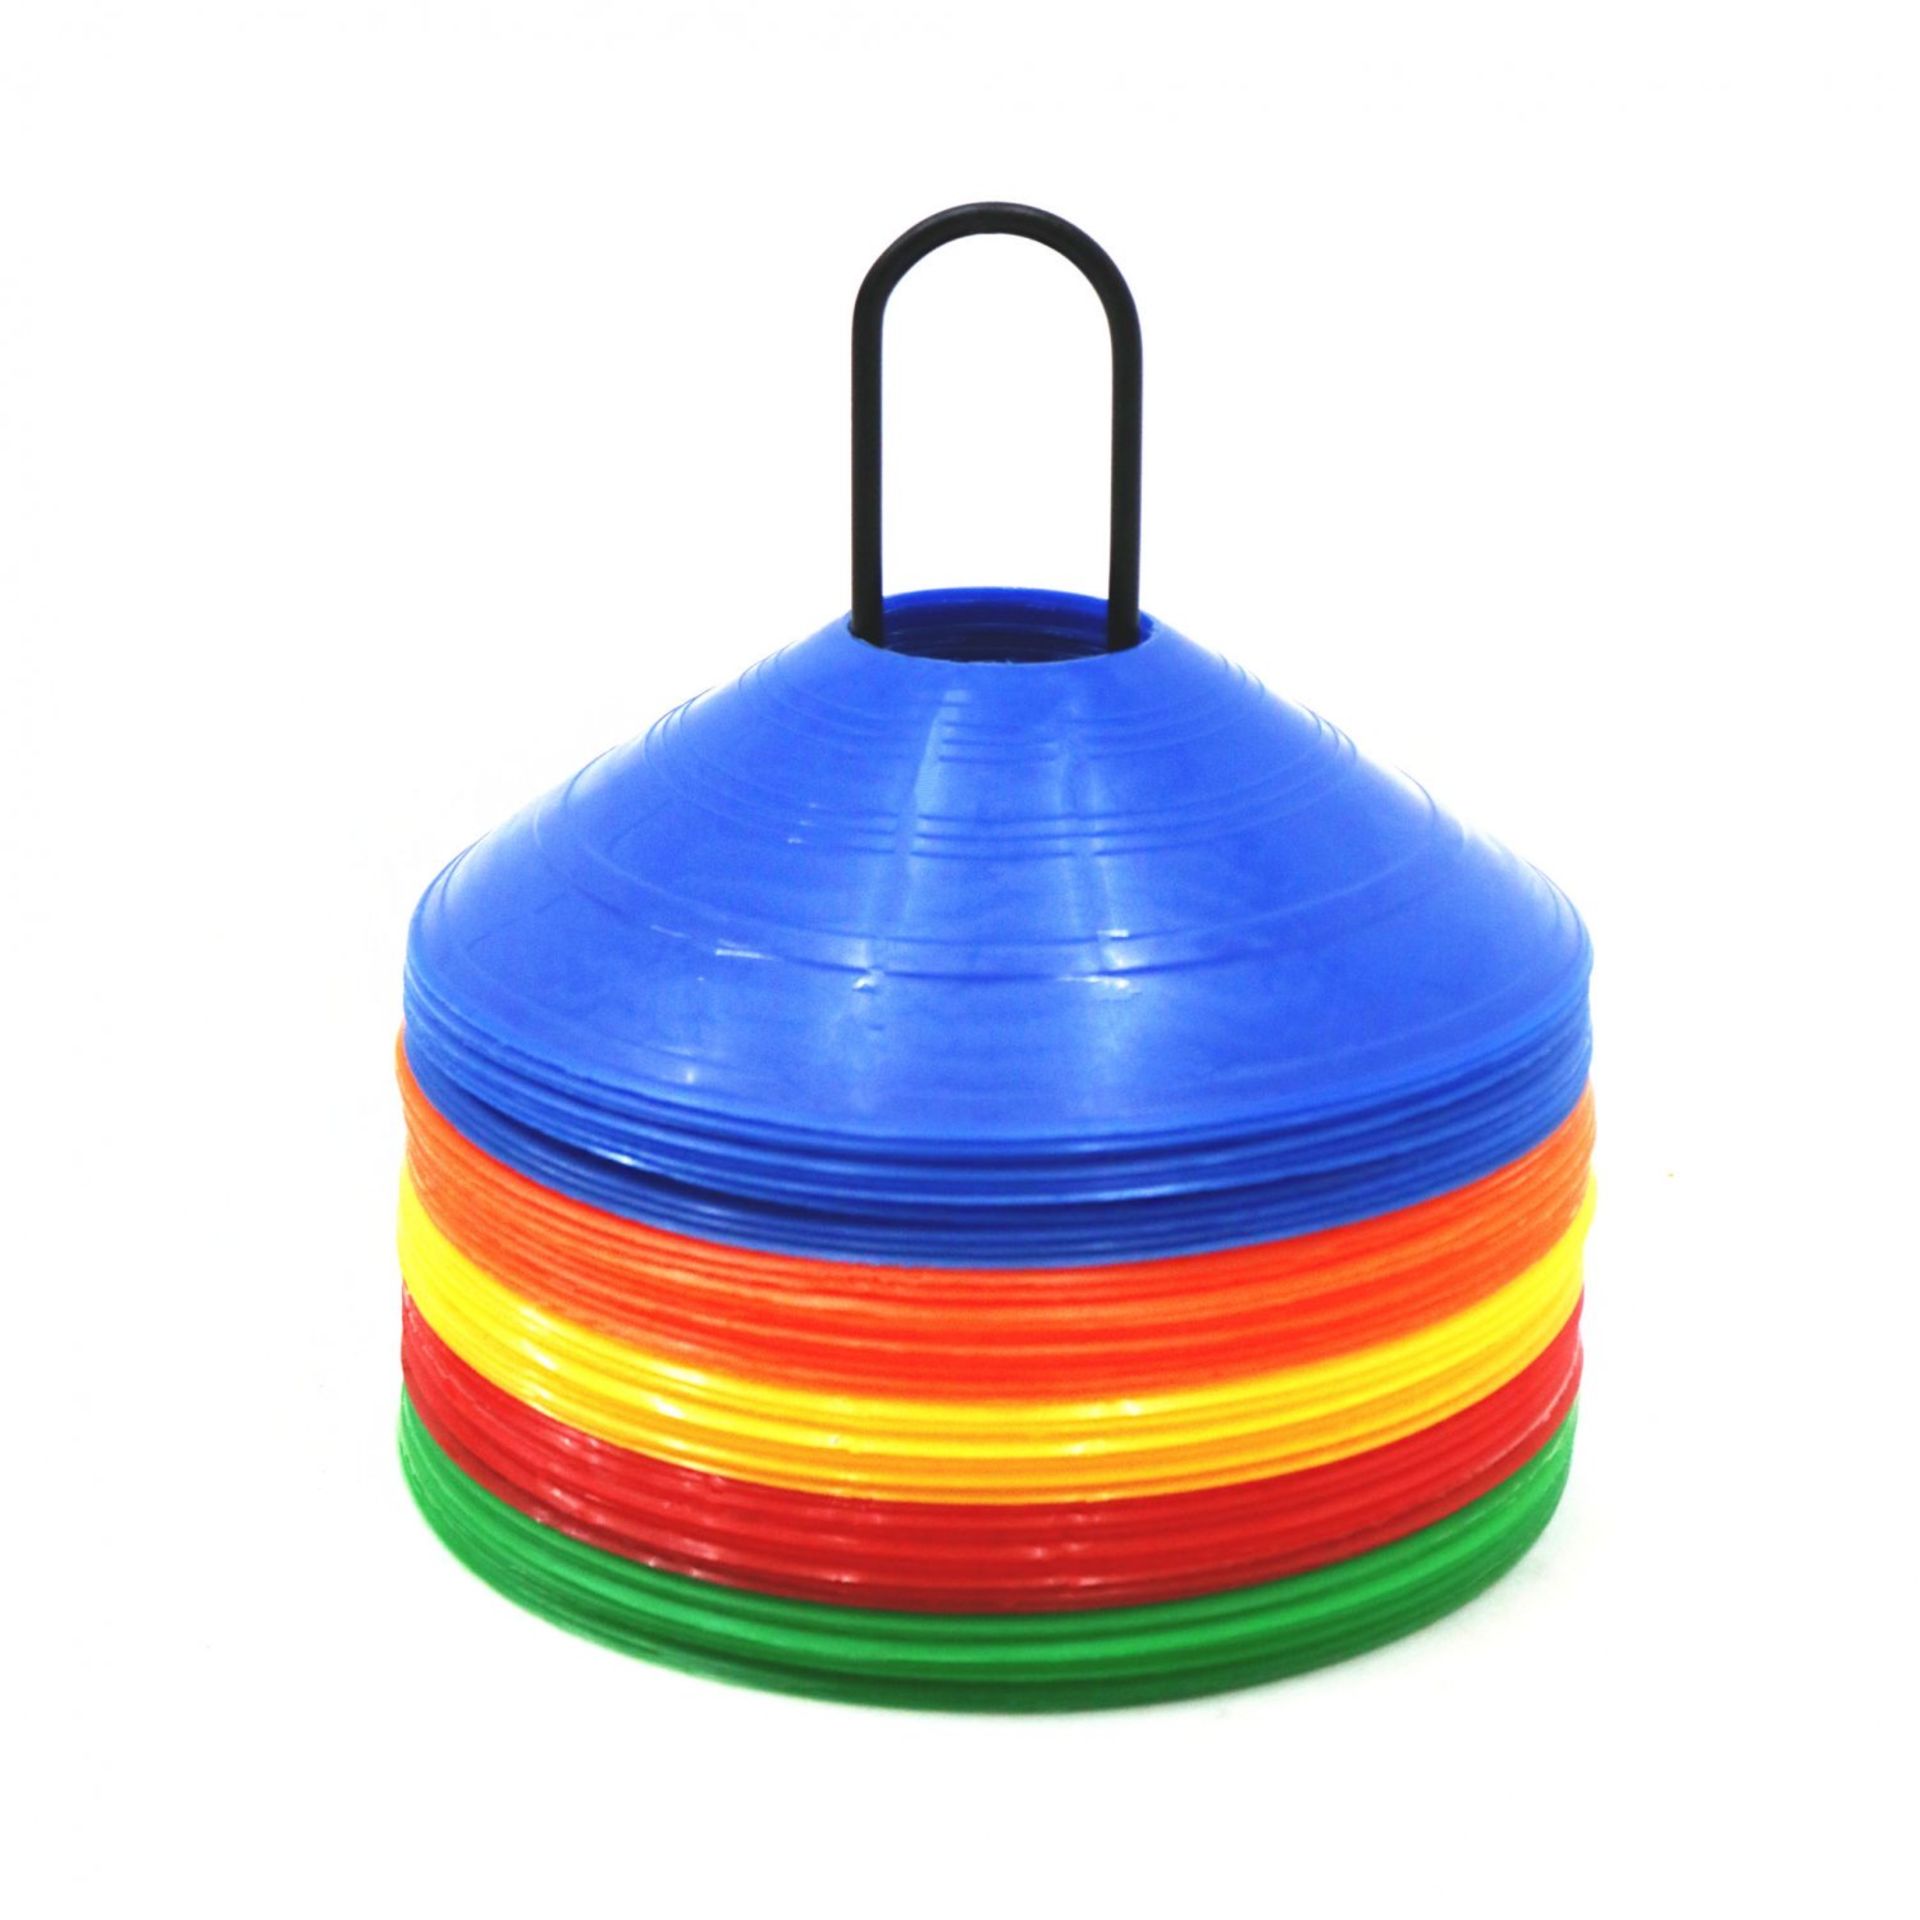 (SK89) 50x Multi Coloured Sports Training Markers Discs Cones w/ Stand This set of 50 traini...